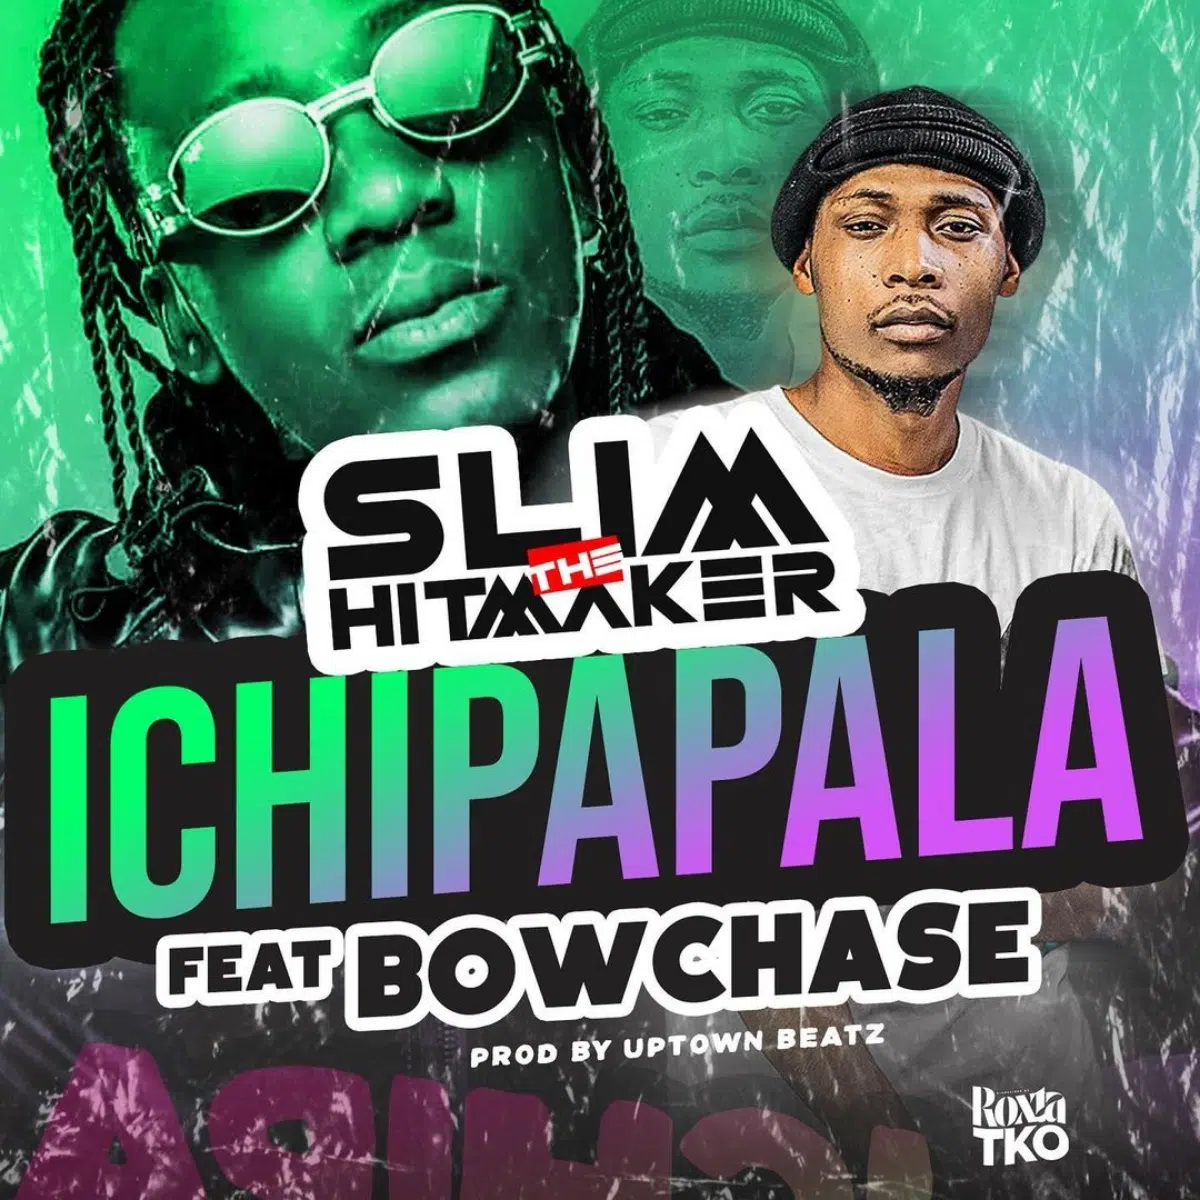 DOWNLOAD: Slim The Hitmaker Ft. Bow Chase – “Ichipapala” Mp3